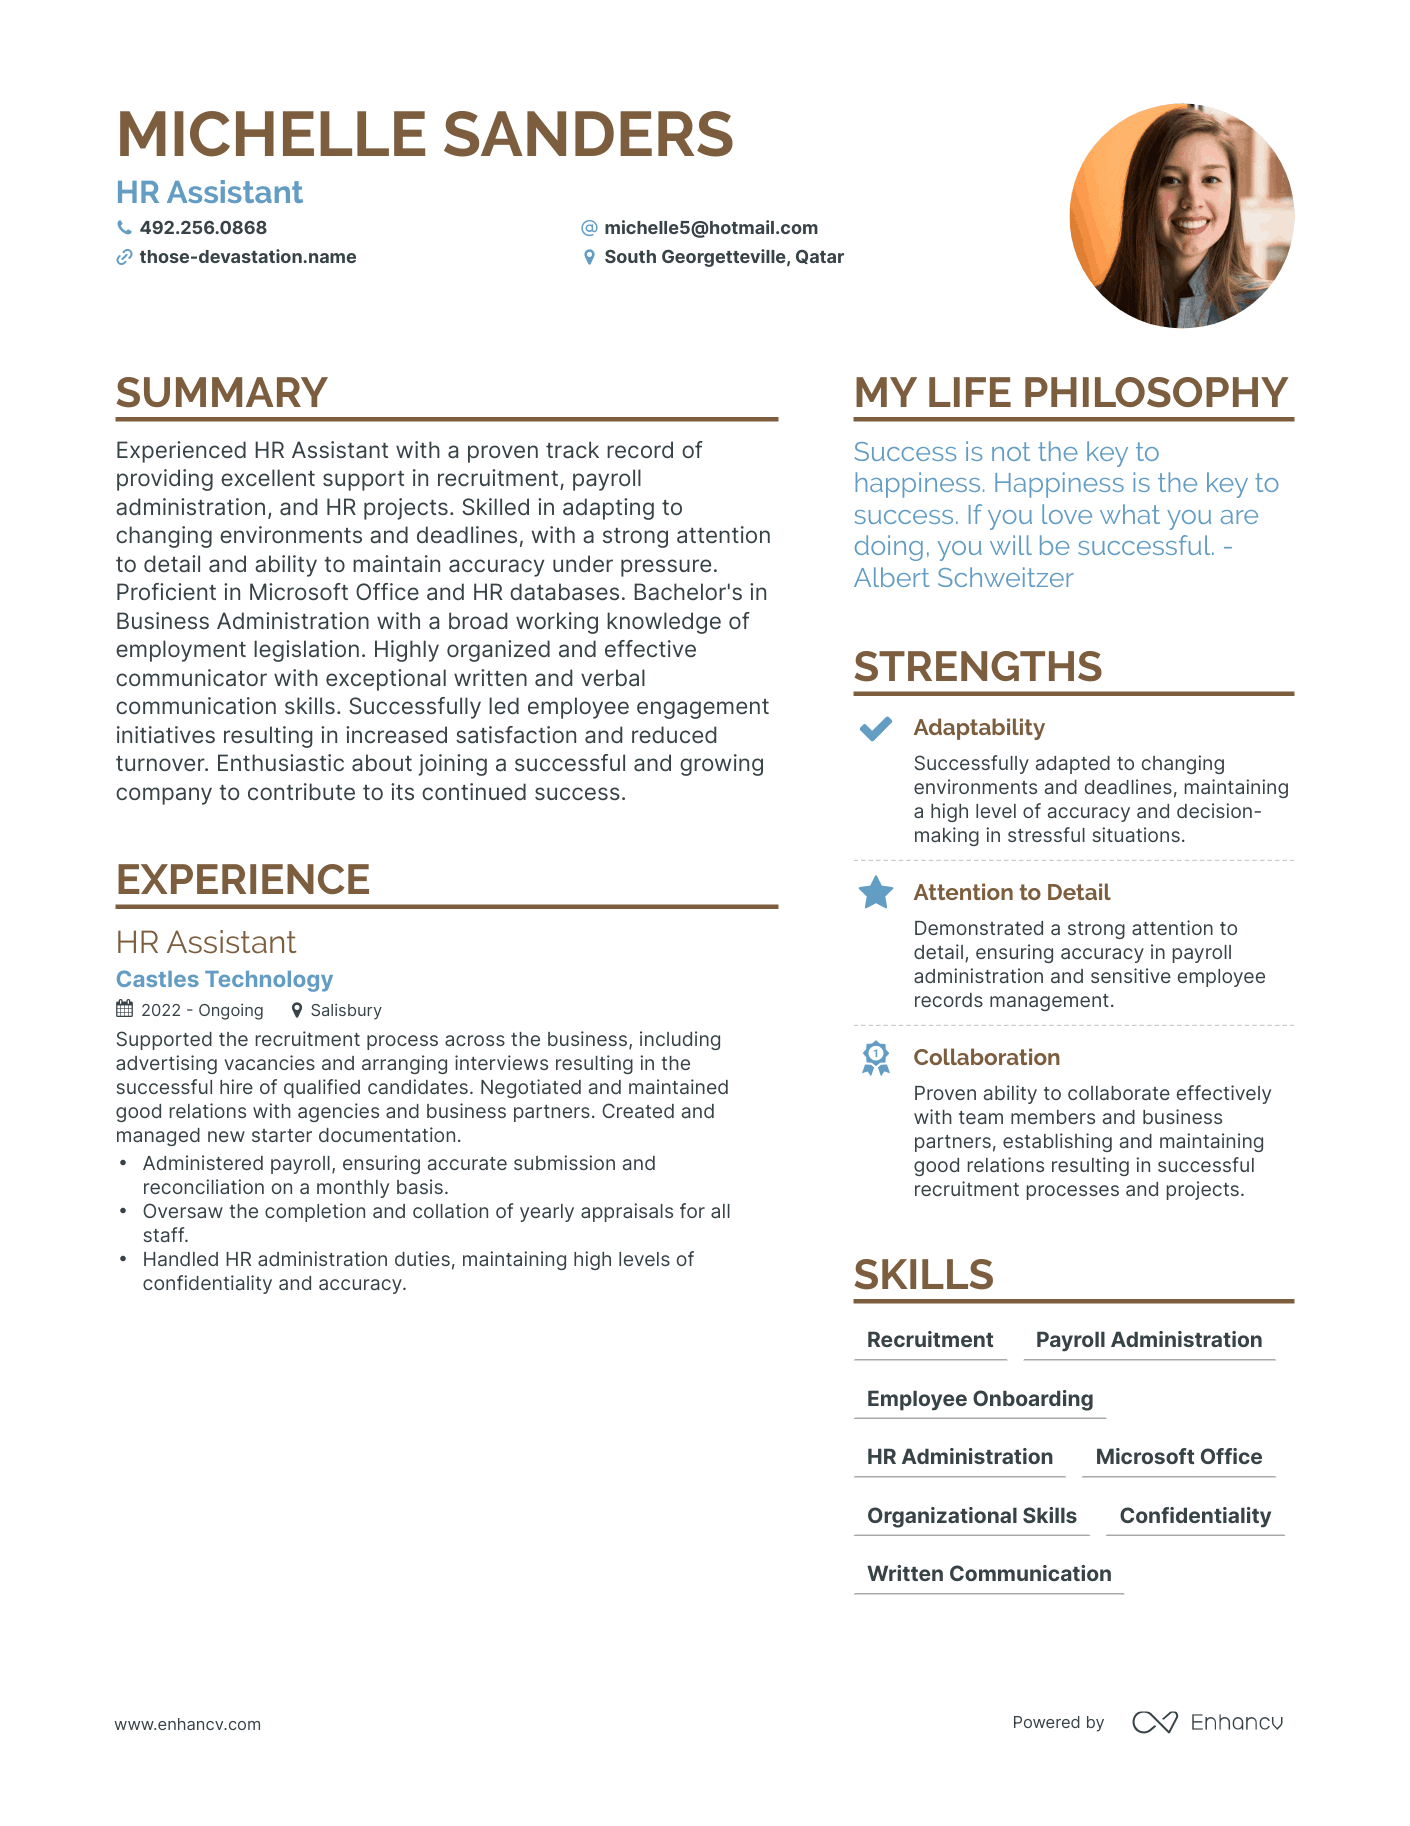 HR Assistant resume example